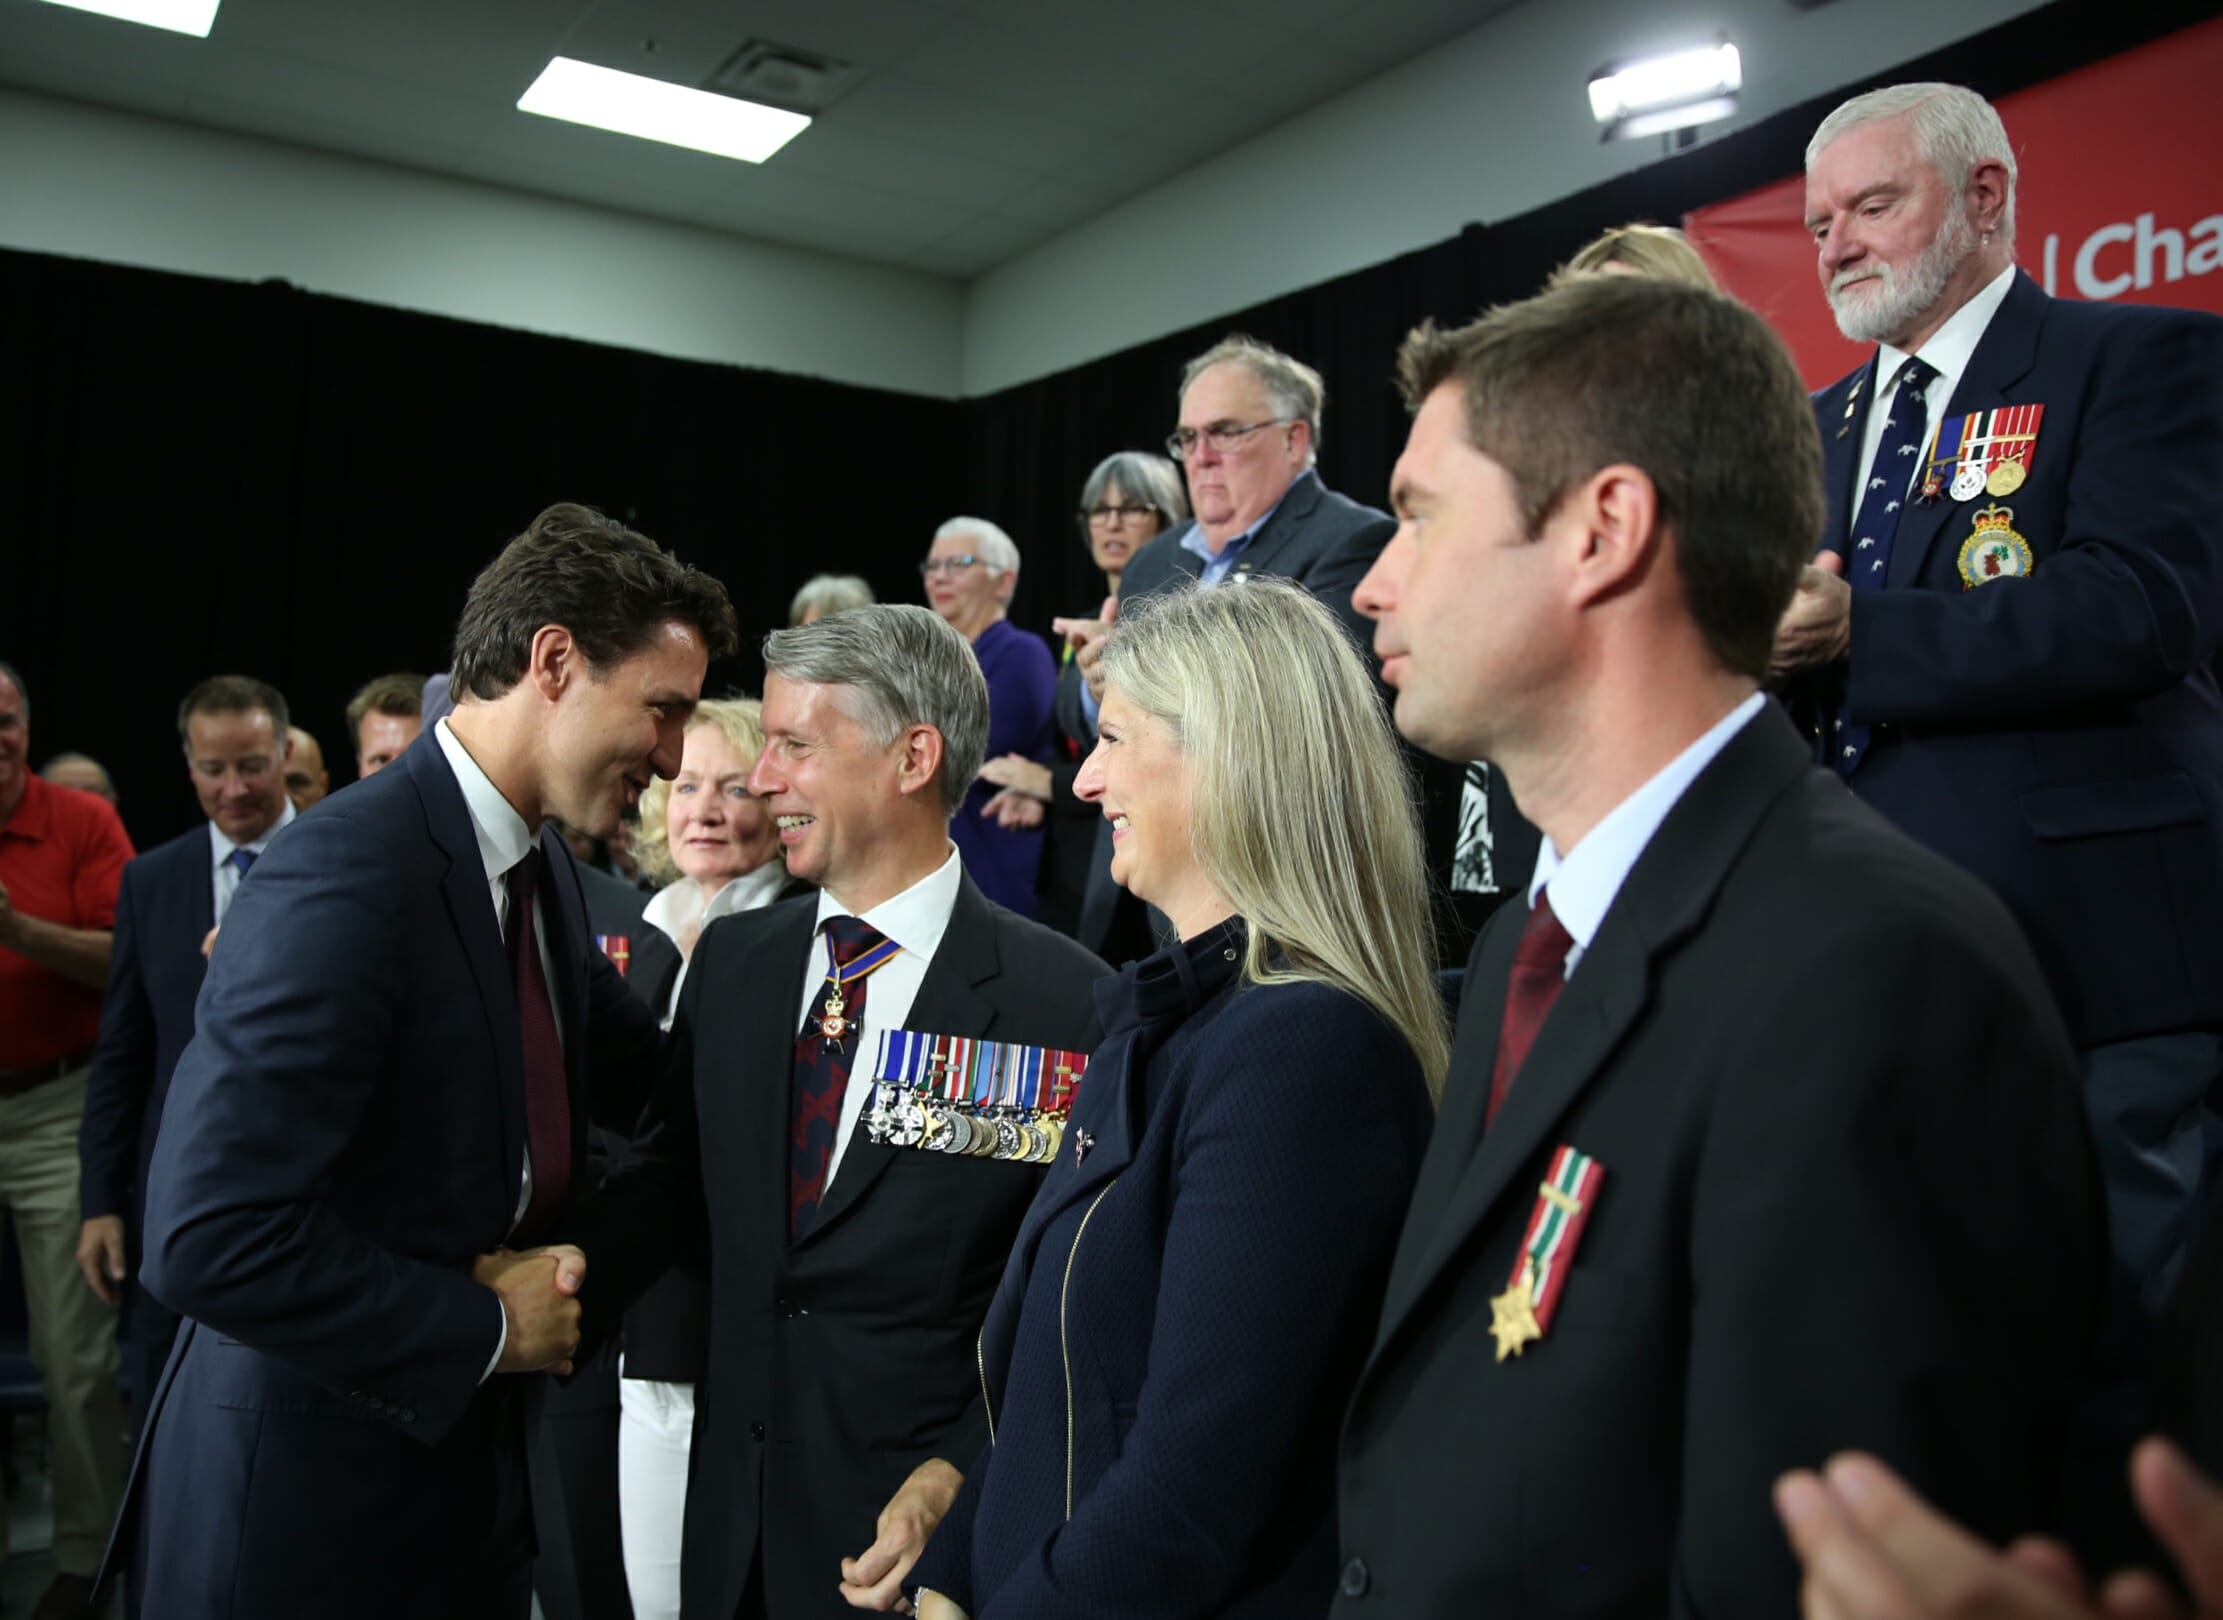 The Leader of the Liberal Party of Canada, Justin Trudeau, was in Belleville today, announcing the Liberal plan for real change for Canada's veterans and their families.